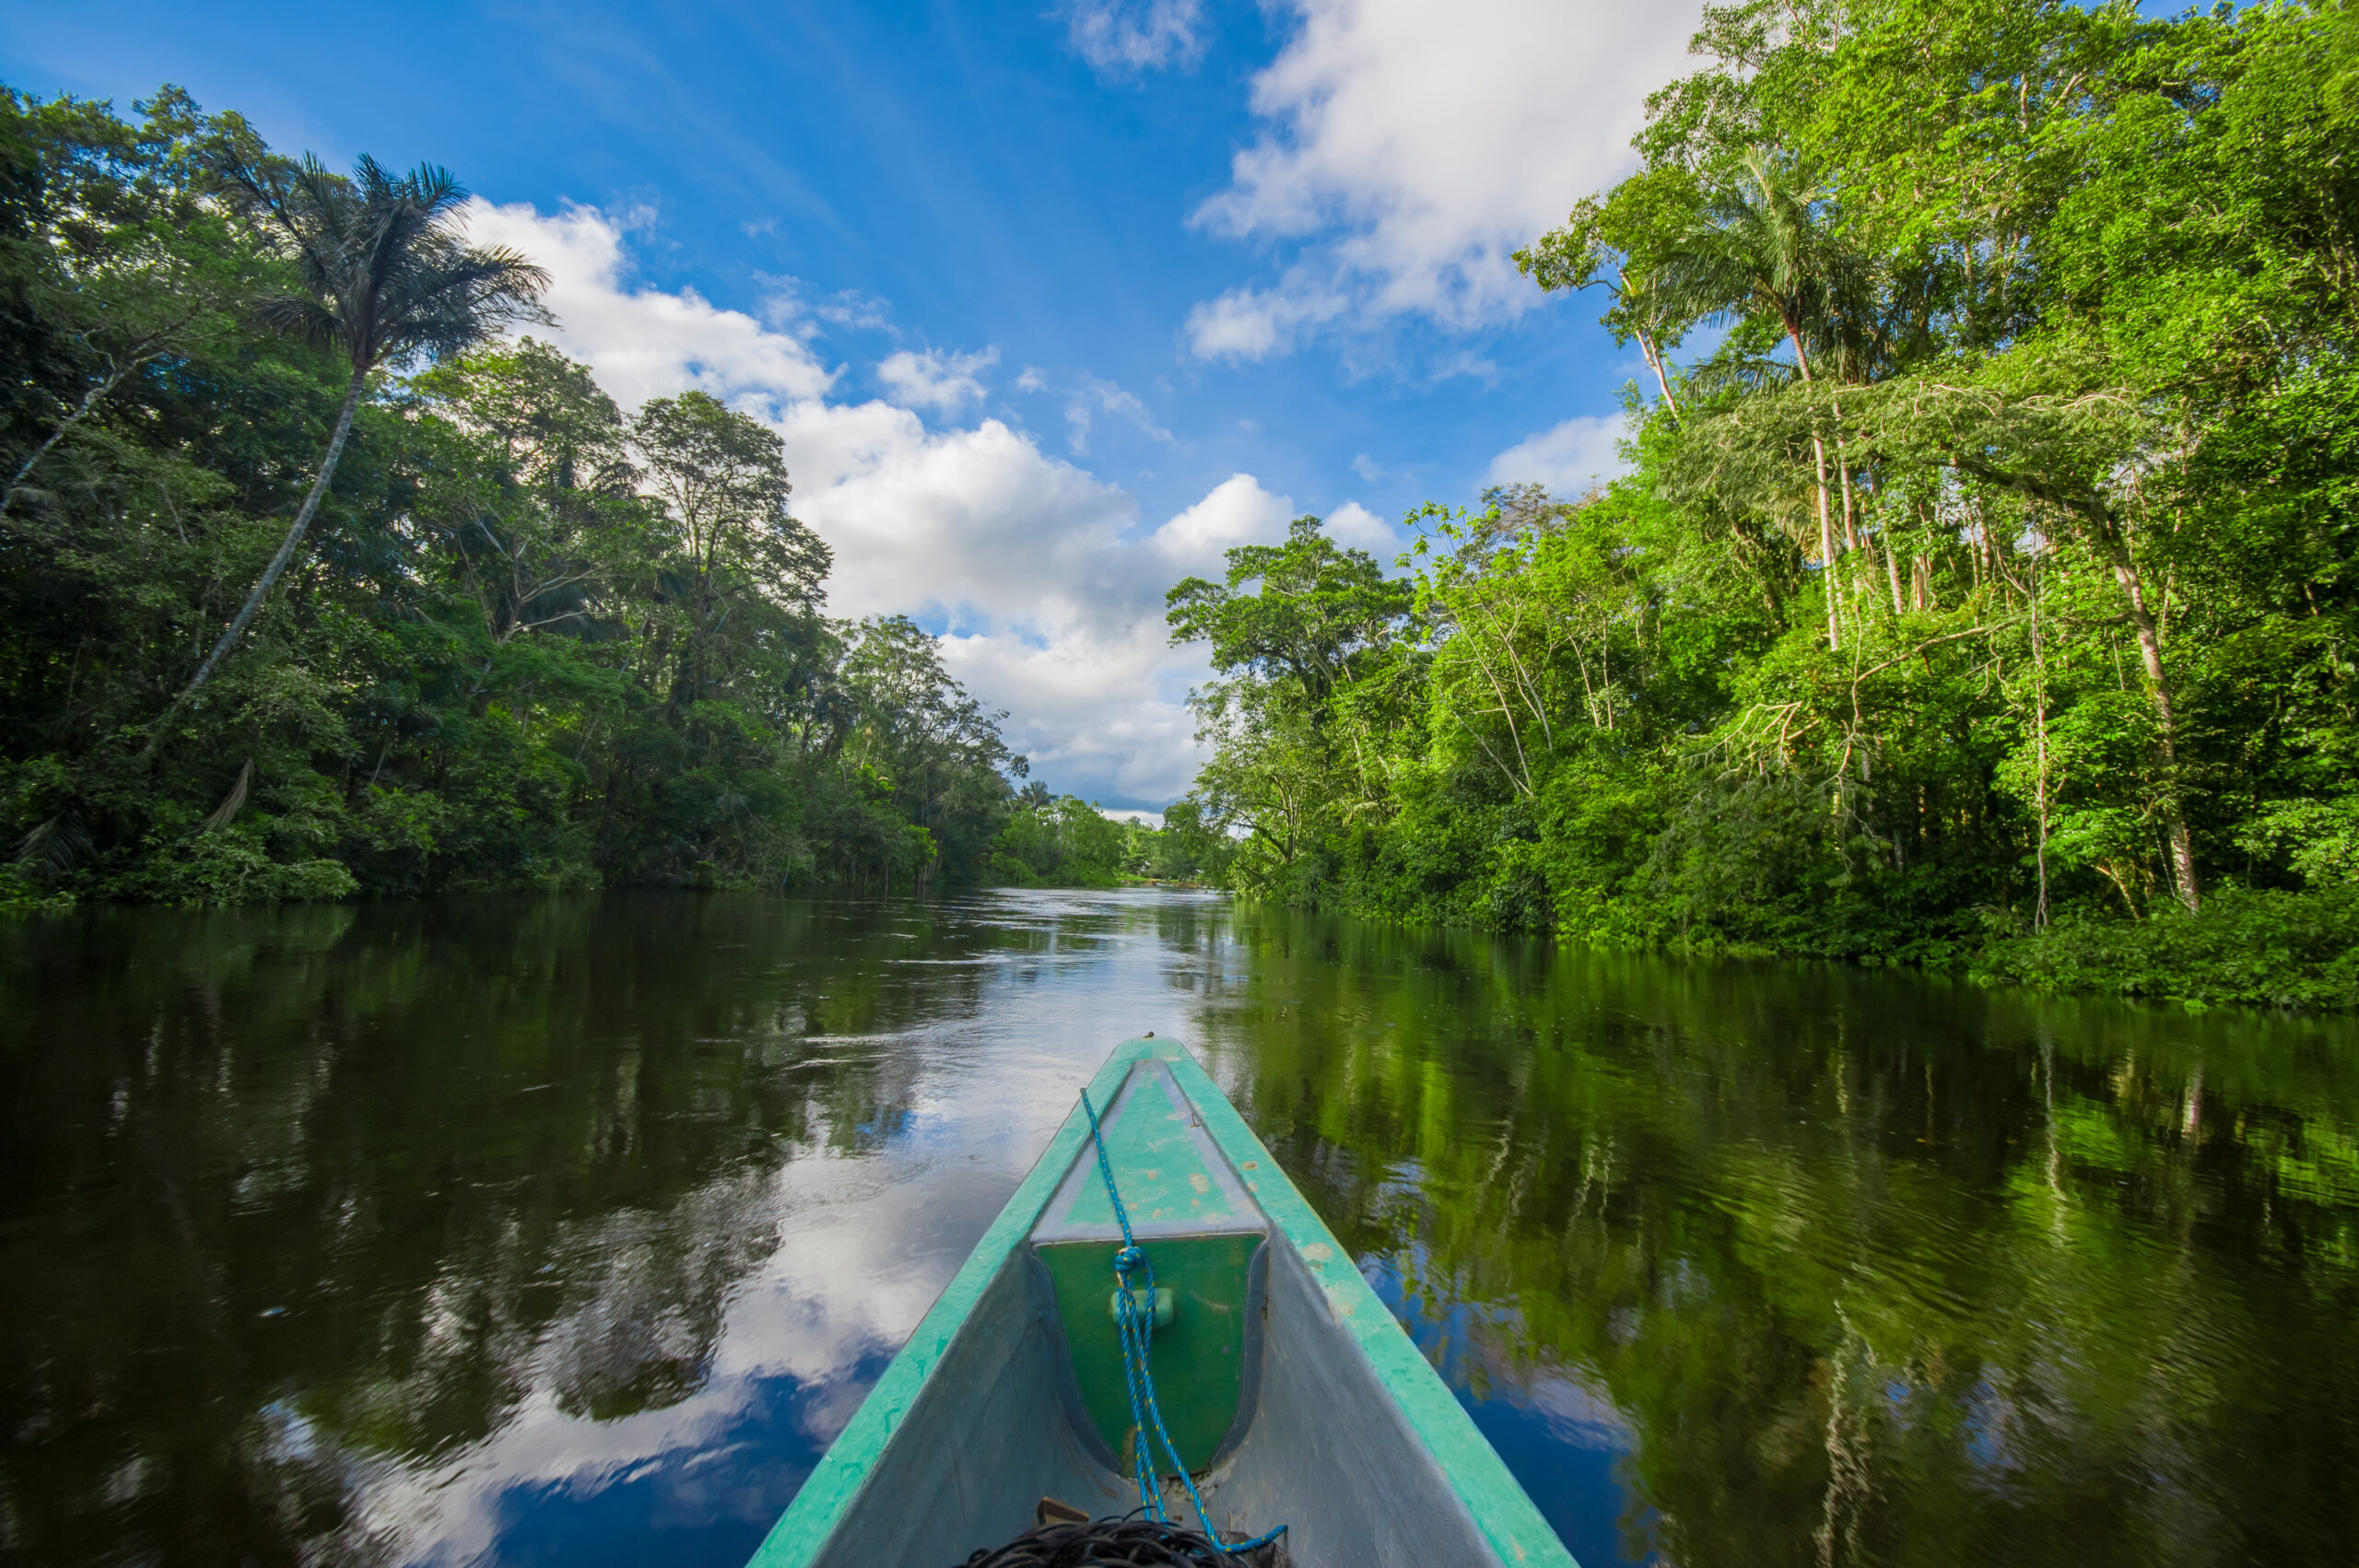 Travelling,By,Boat,Into,The,Depth,Of,Amazon,Jungles,In